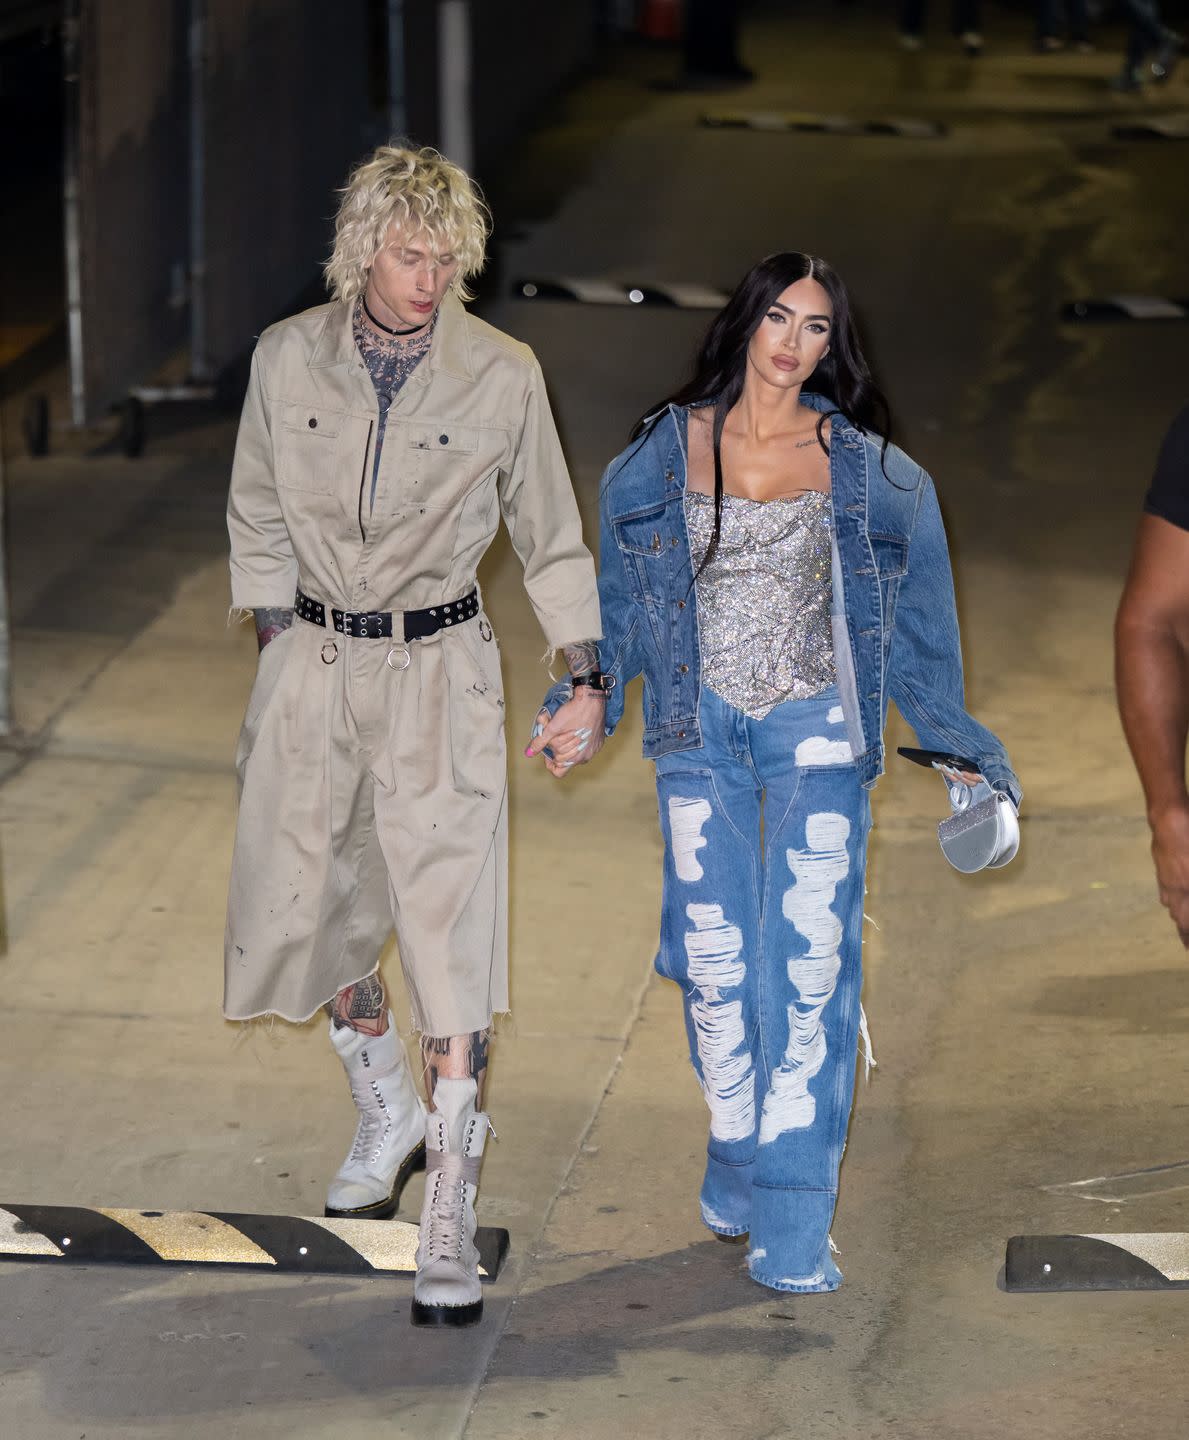 los angeles, ca december 07 machine gun kelly and megan fox are seen at jimmy kimmel live on december 07, 2022 in los angeles, california photo by rbbauer griffingc images